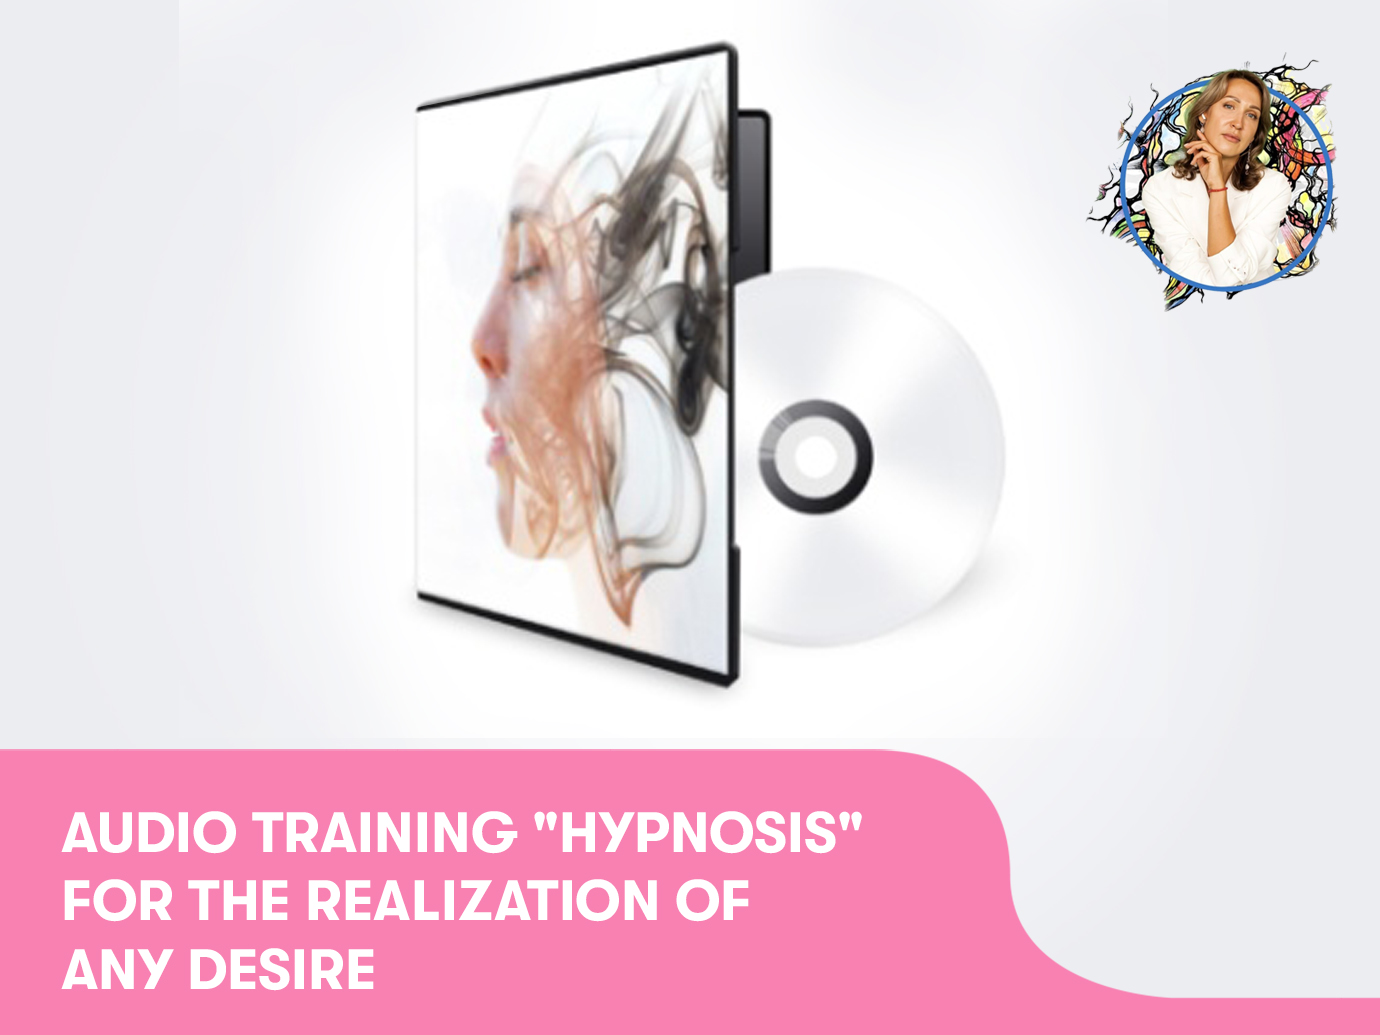 Audio training “Hypnosis“ for the realization of any desire